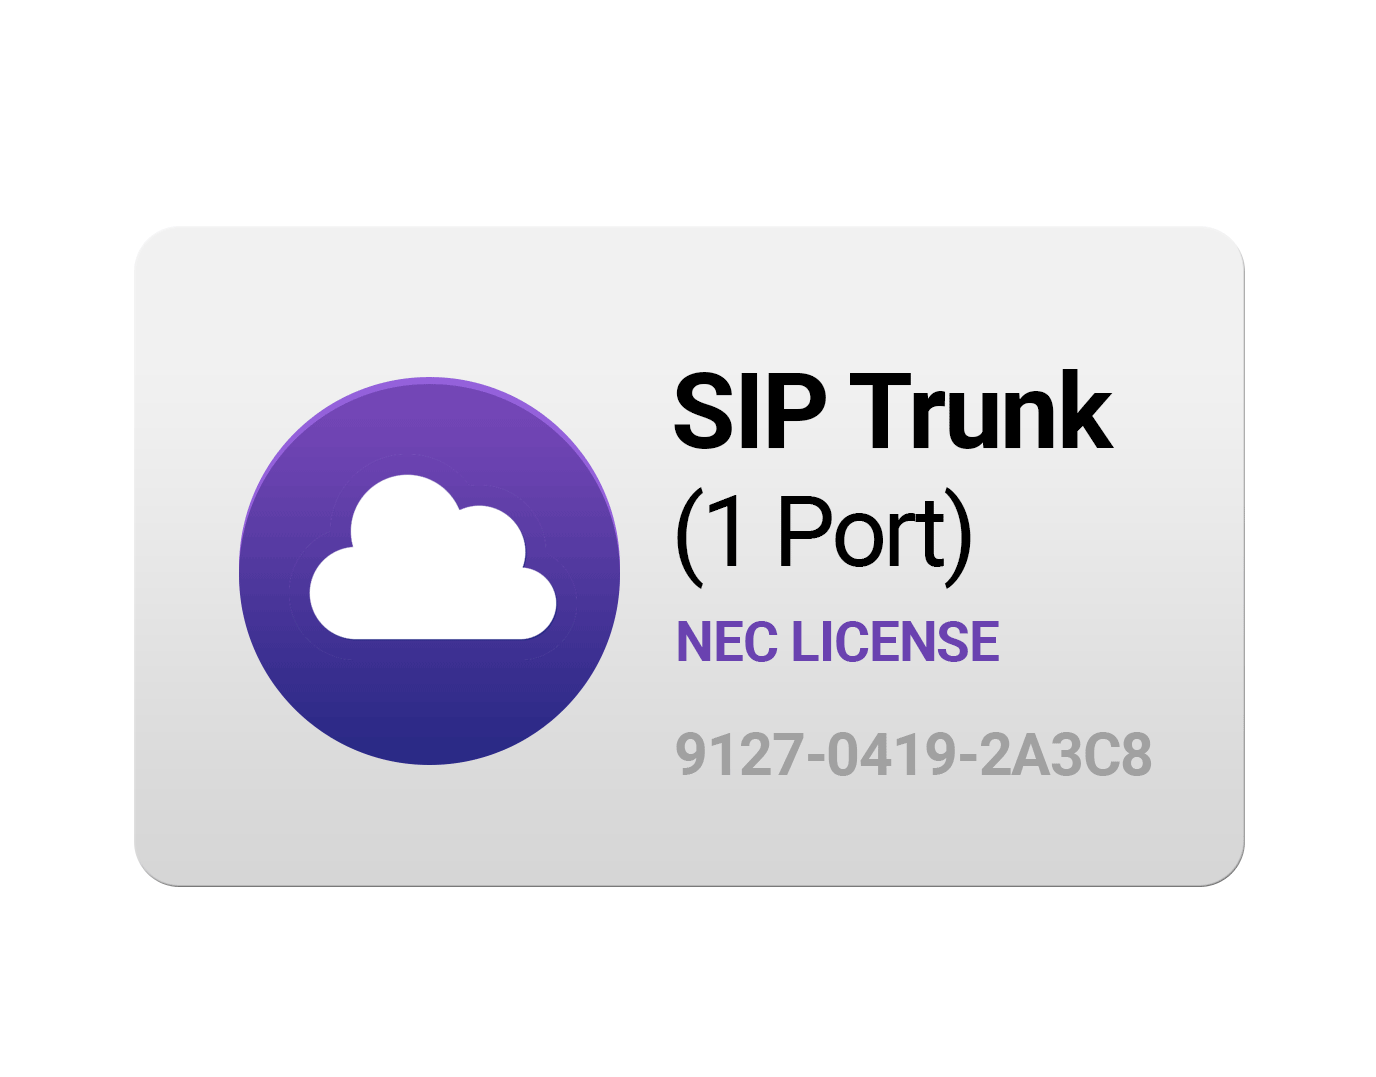 Details about   NEC SL1100 IP4AT-CPU w/ VOIPDB-C1 MEMBD,11 SIP trunks licence 1year wty,GST inc 